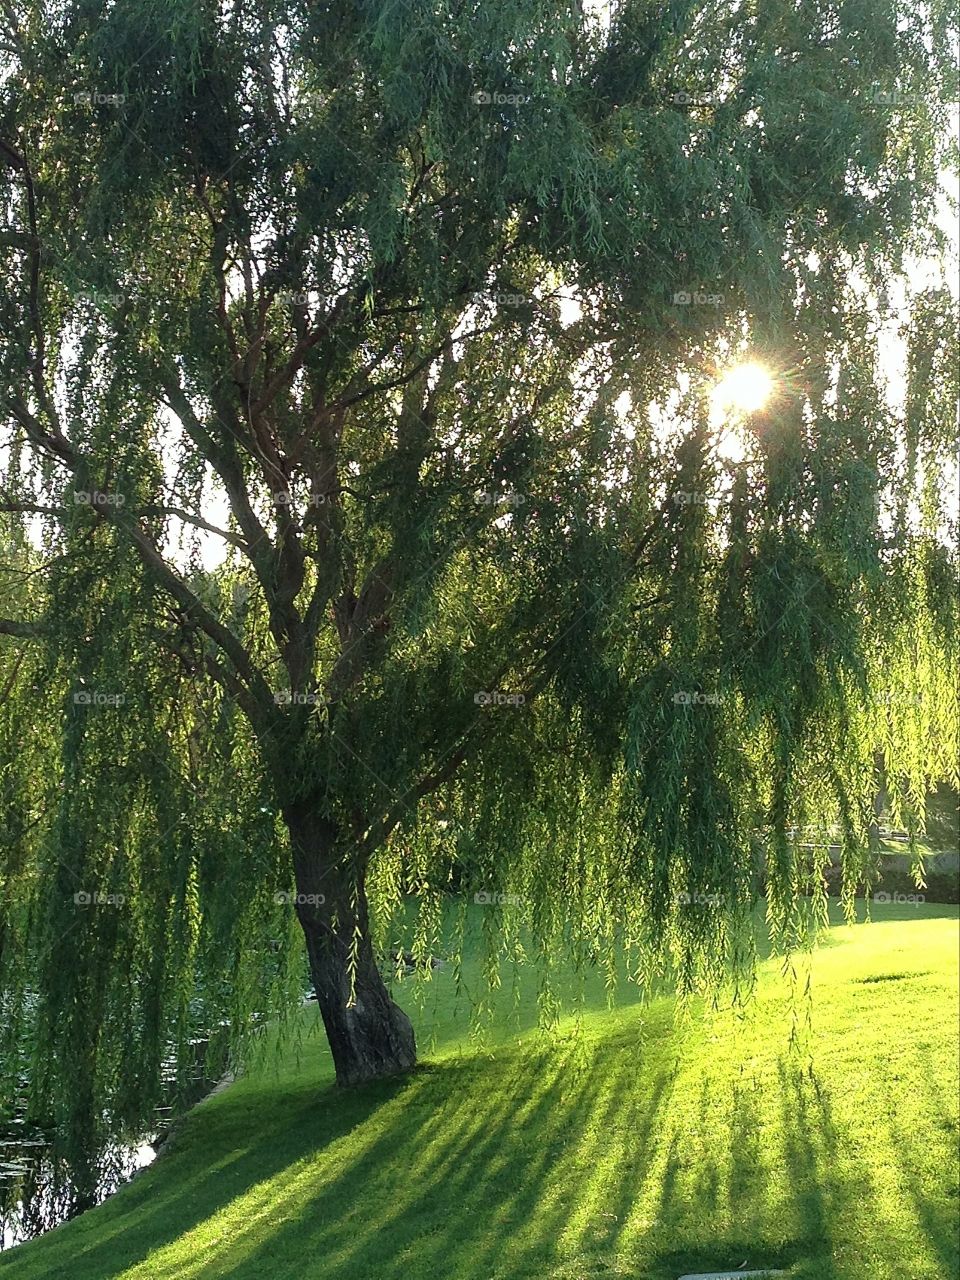 Sun through weeping willow.  . Willow tree next to a lake with the morning sun shining behind it. 